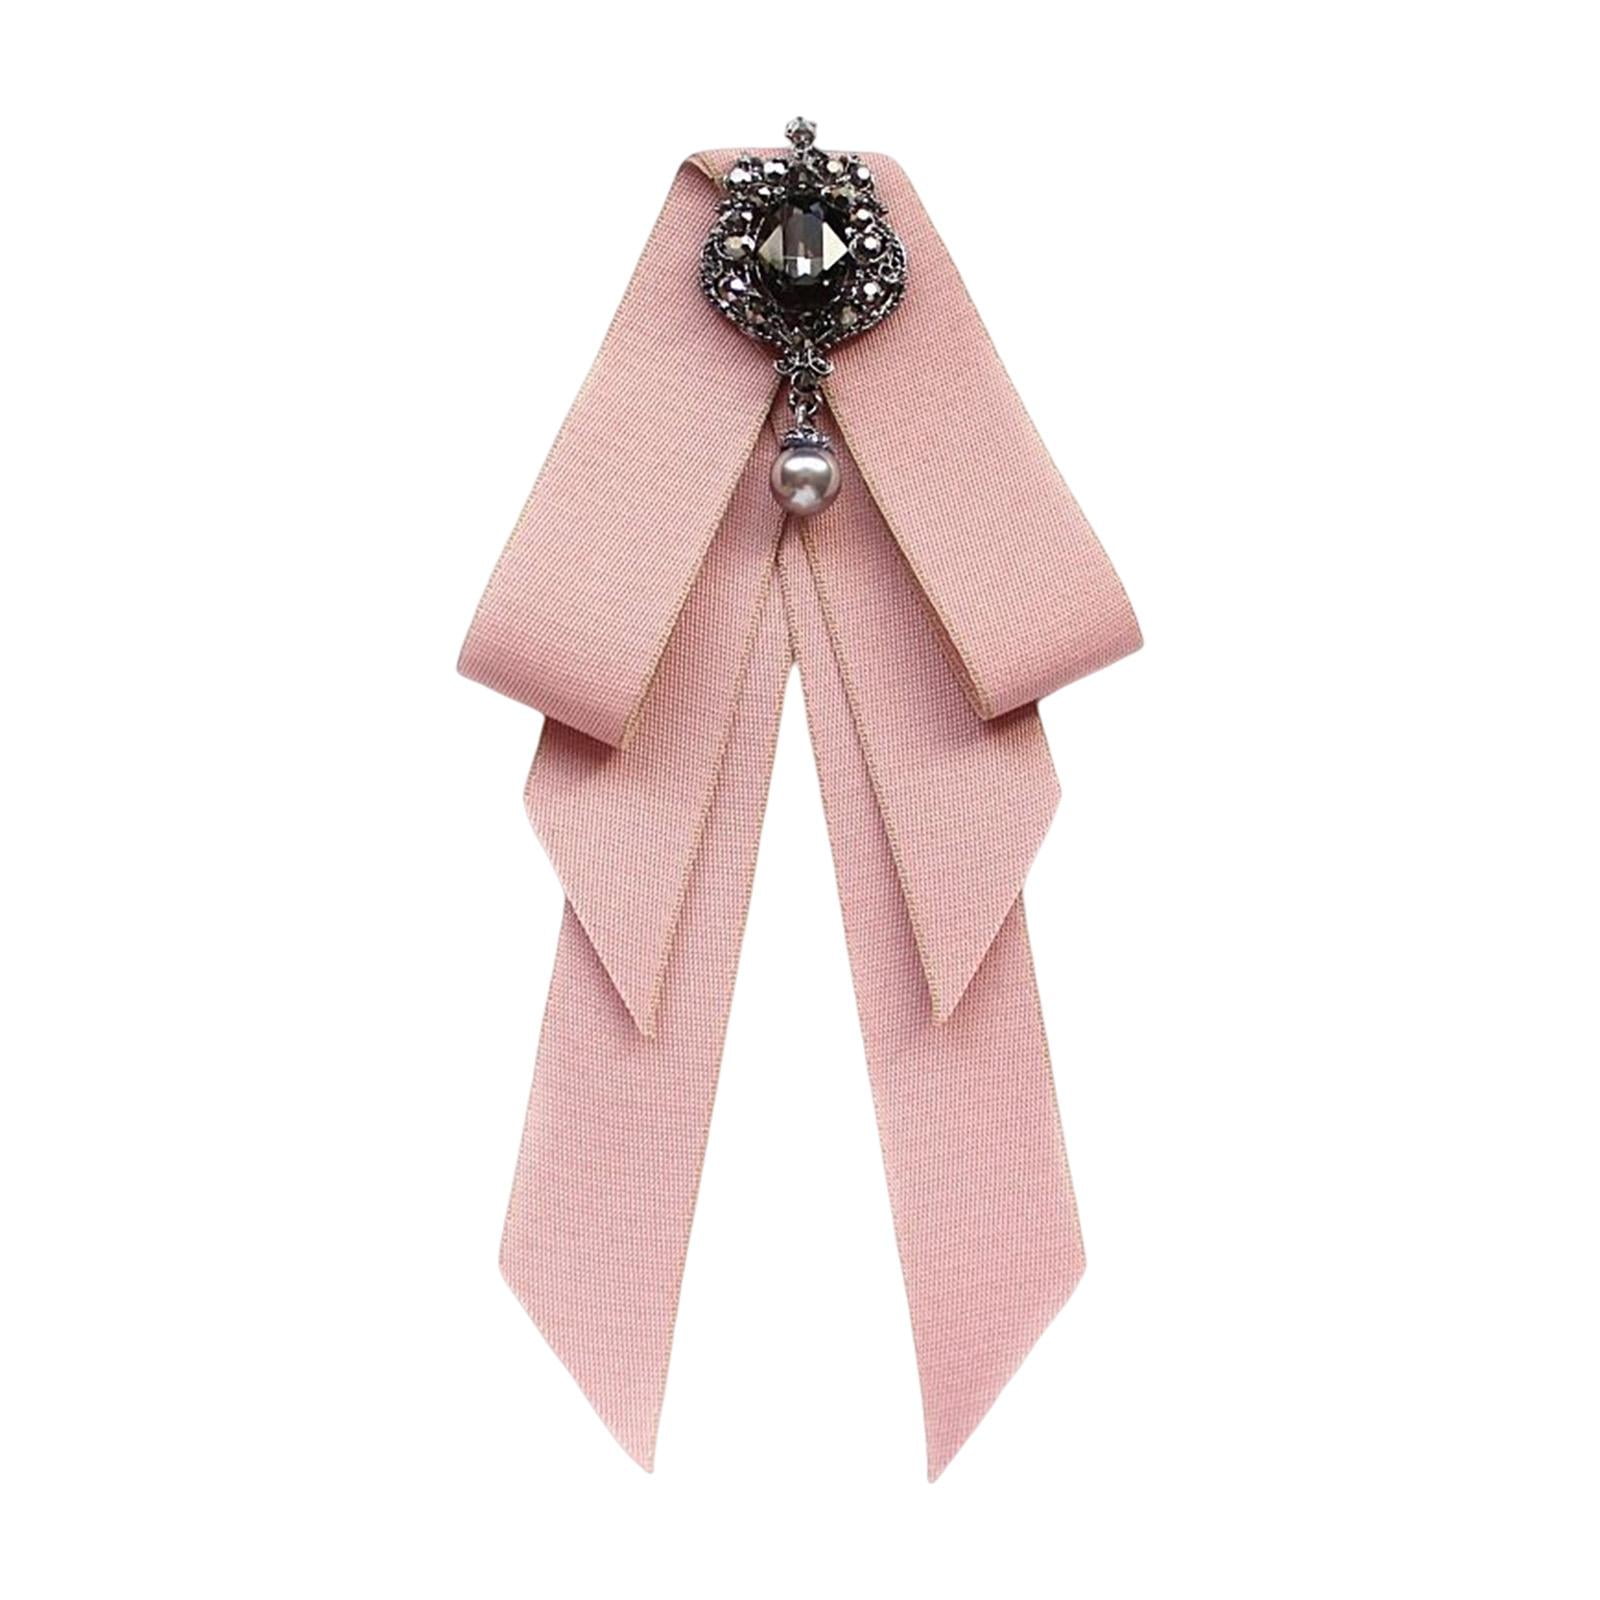 Chanel Ribbon, Free shipping., Price adjusted for